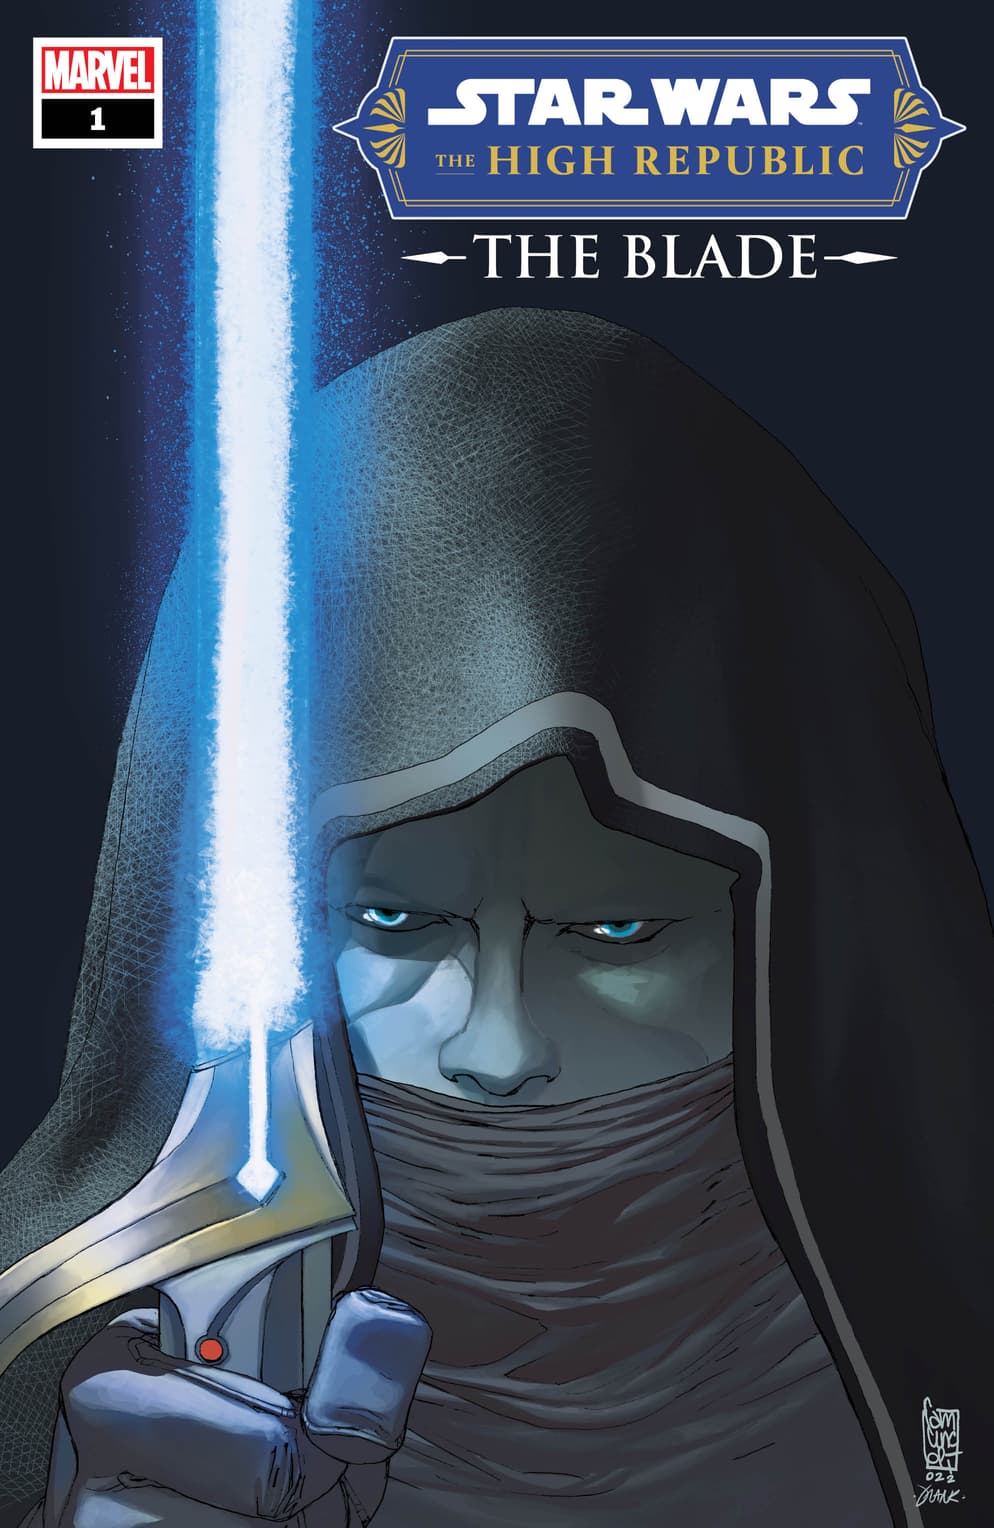 STAR WARS: THE HIGH REPUBLIC - THE BLADE #1 cover by Giuseppe Camuncoli and Frank Martin